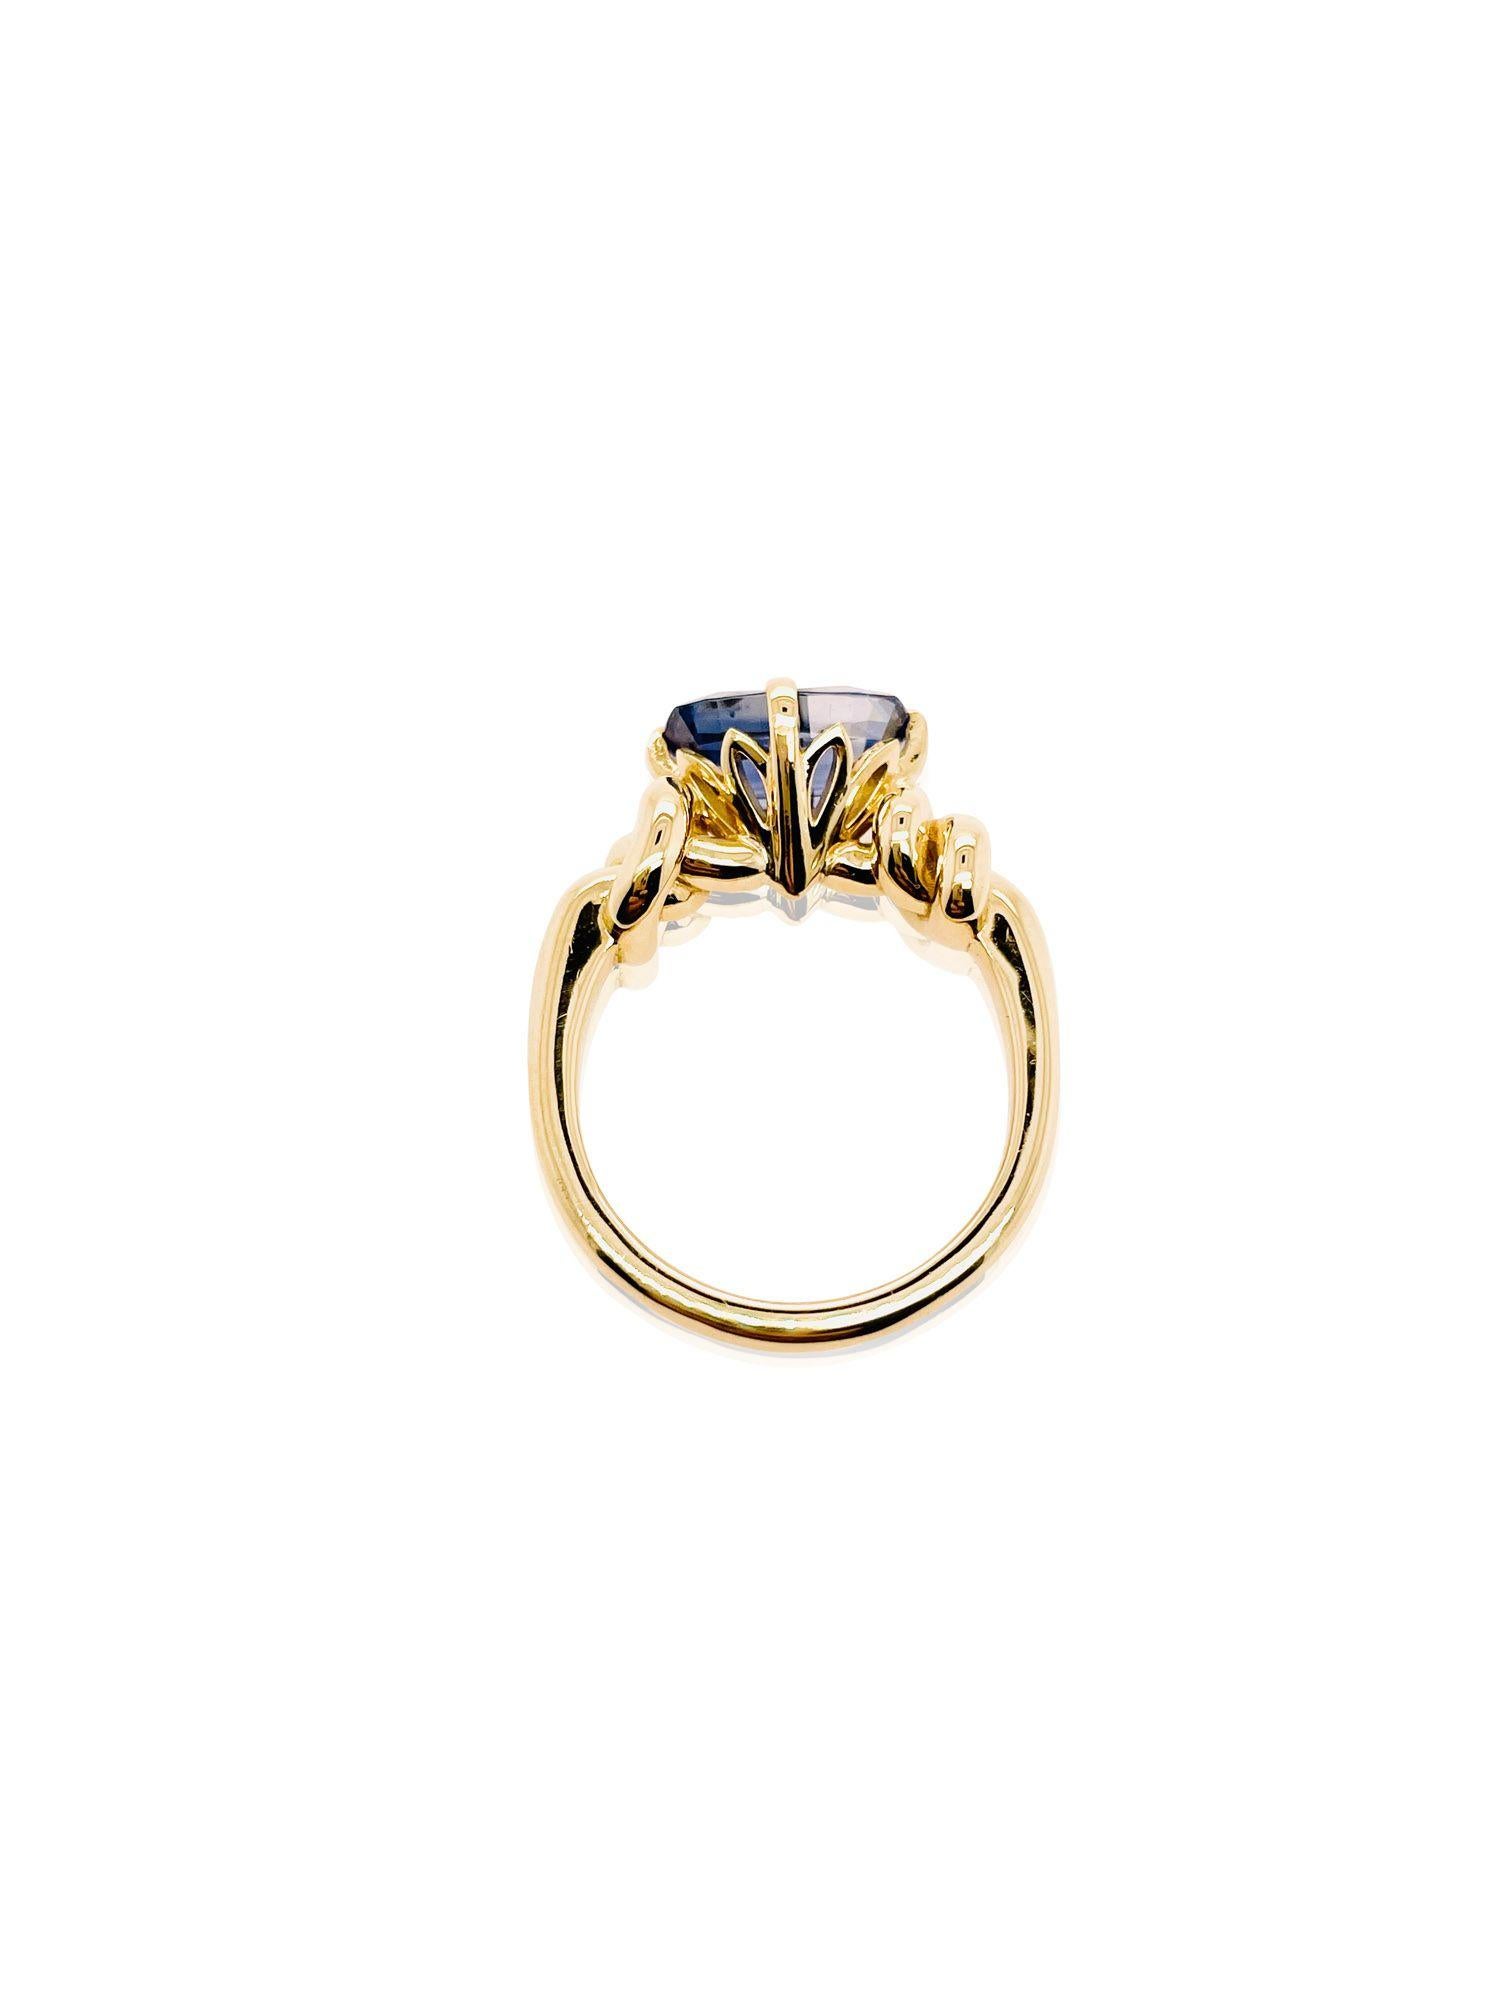 For Sale:  3ct Blue Ceylon Sapphire Cushion Cut Forget Me Knot Ring in 18ct Yellow Gold 16